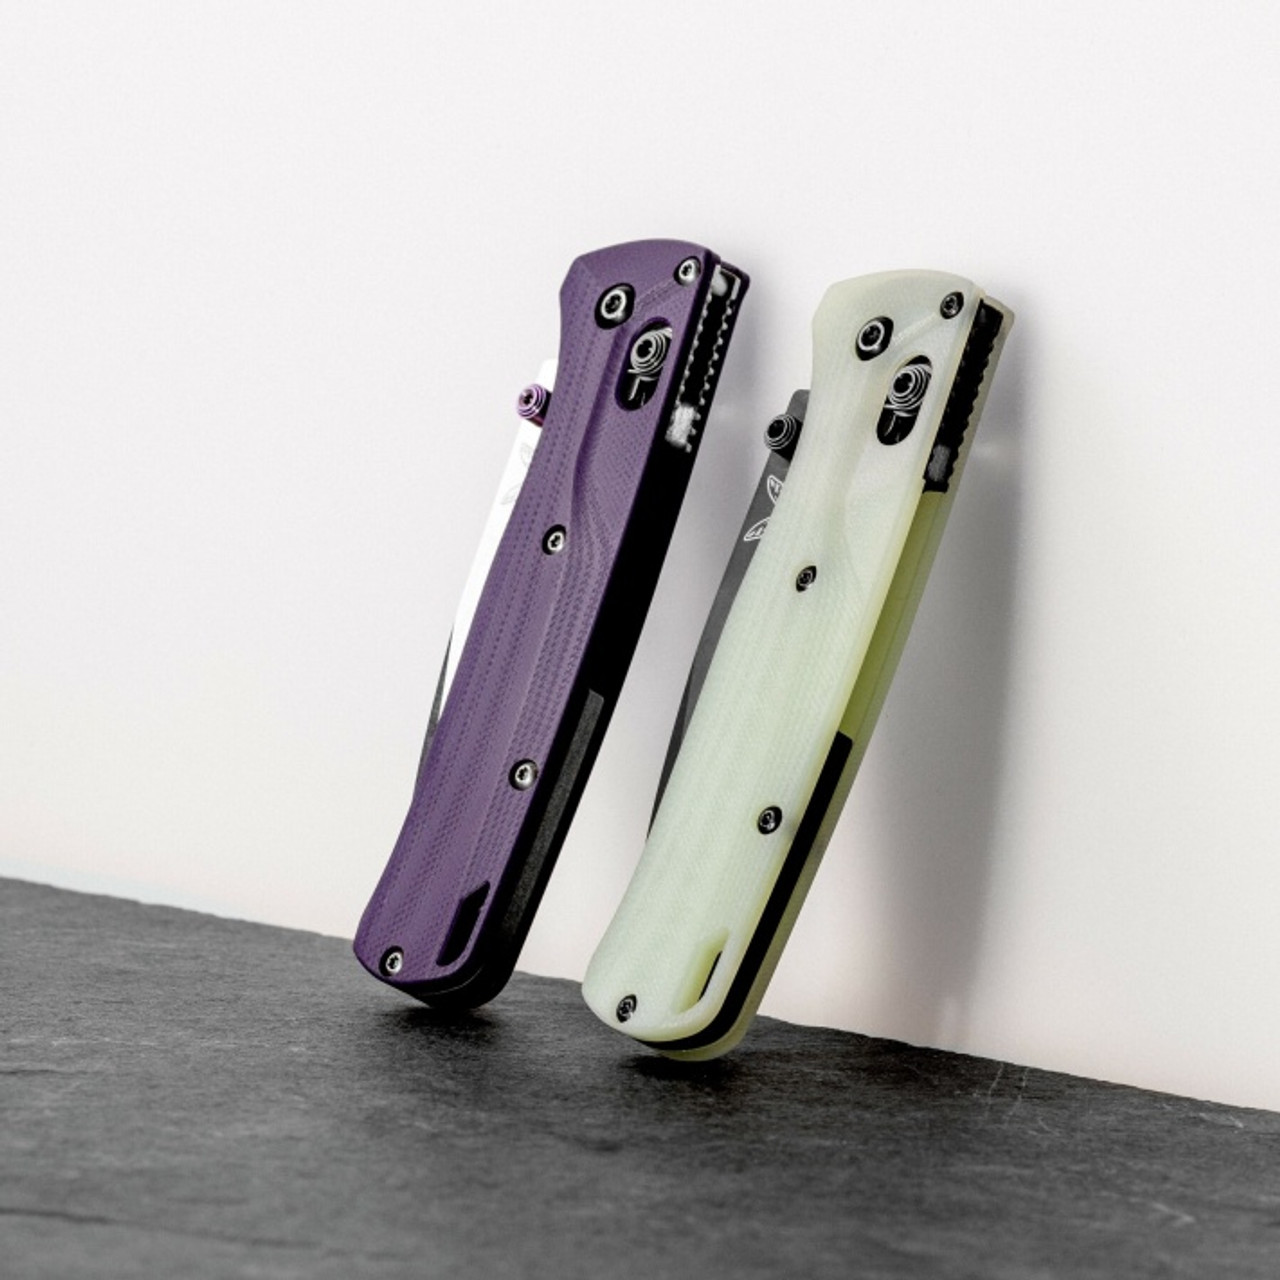 Flytanium Jade G-10 Crossfade Scales for Benchmade Mini-Bugout - Dye them any color you like. Shown with a pair that has been dyed purple (not included)